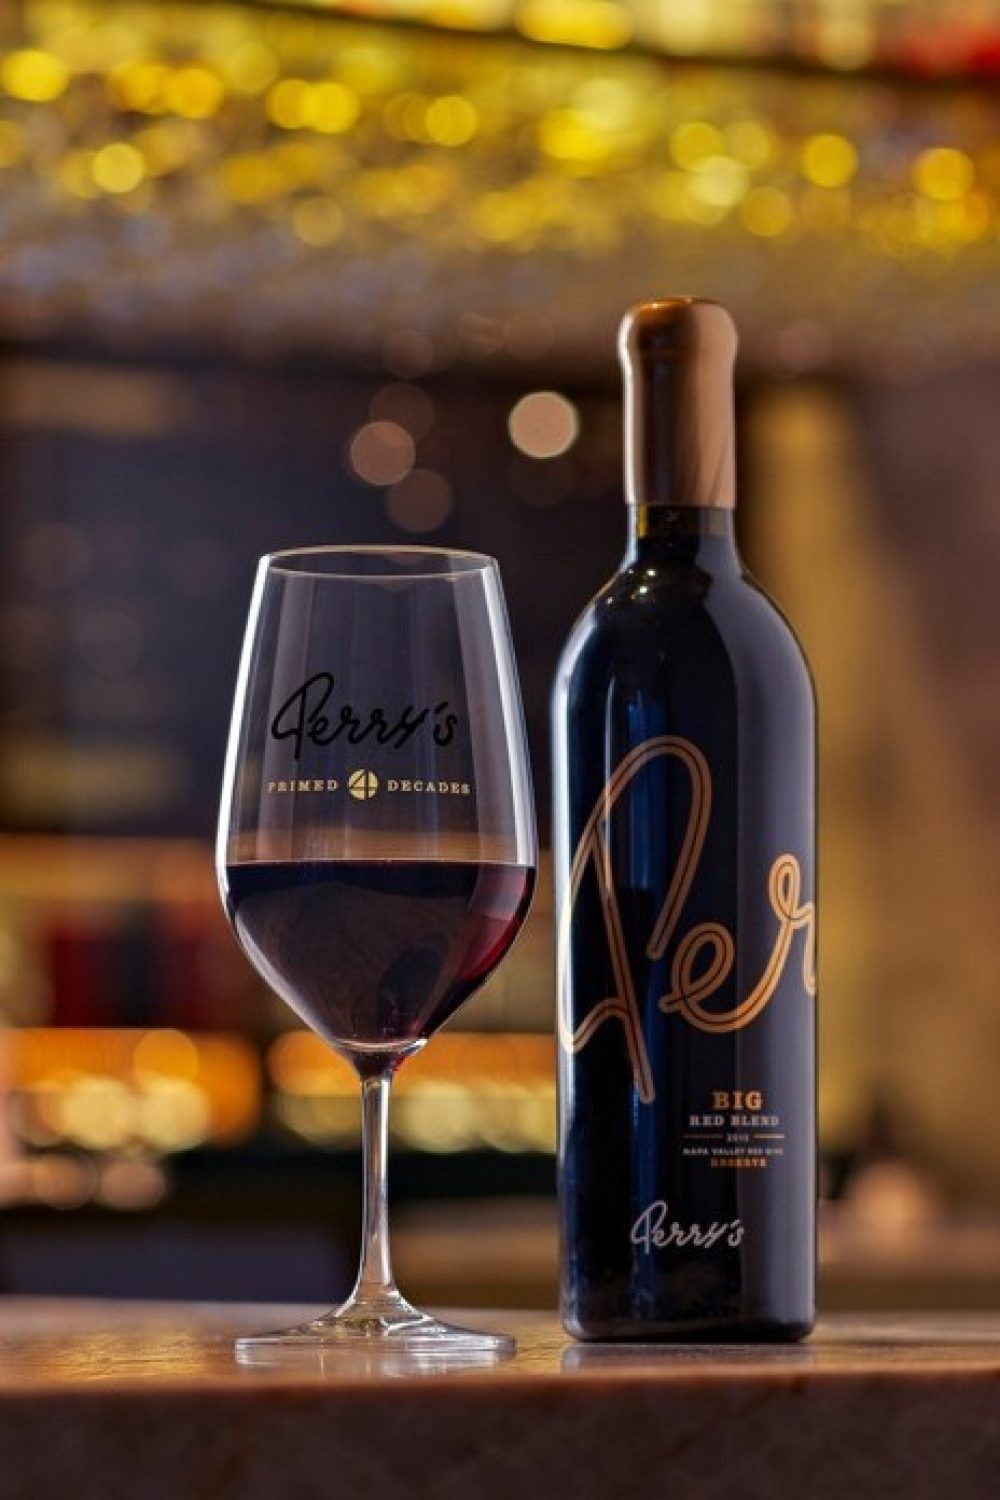 https://www.chicagofoodmagazine.com/content/images/media-295/_large/Perrys-Reserve-Big-Red-Blend.jpg